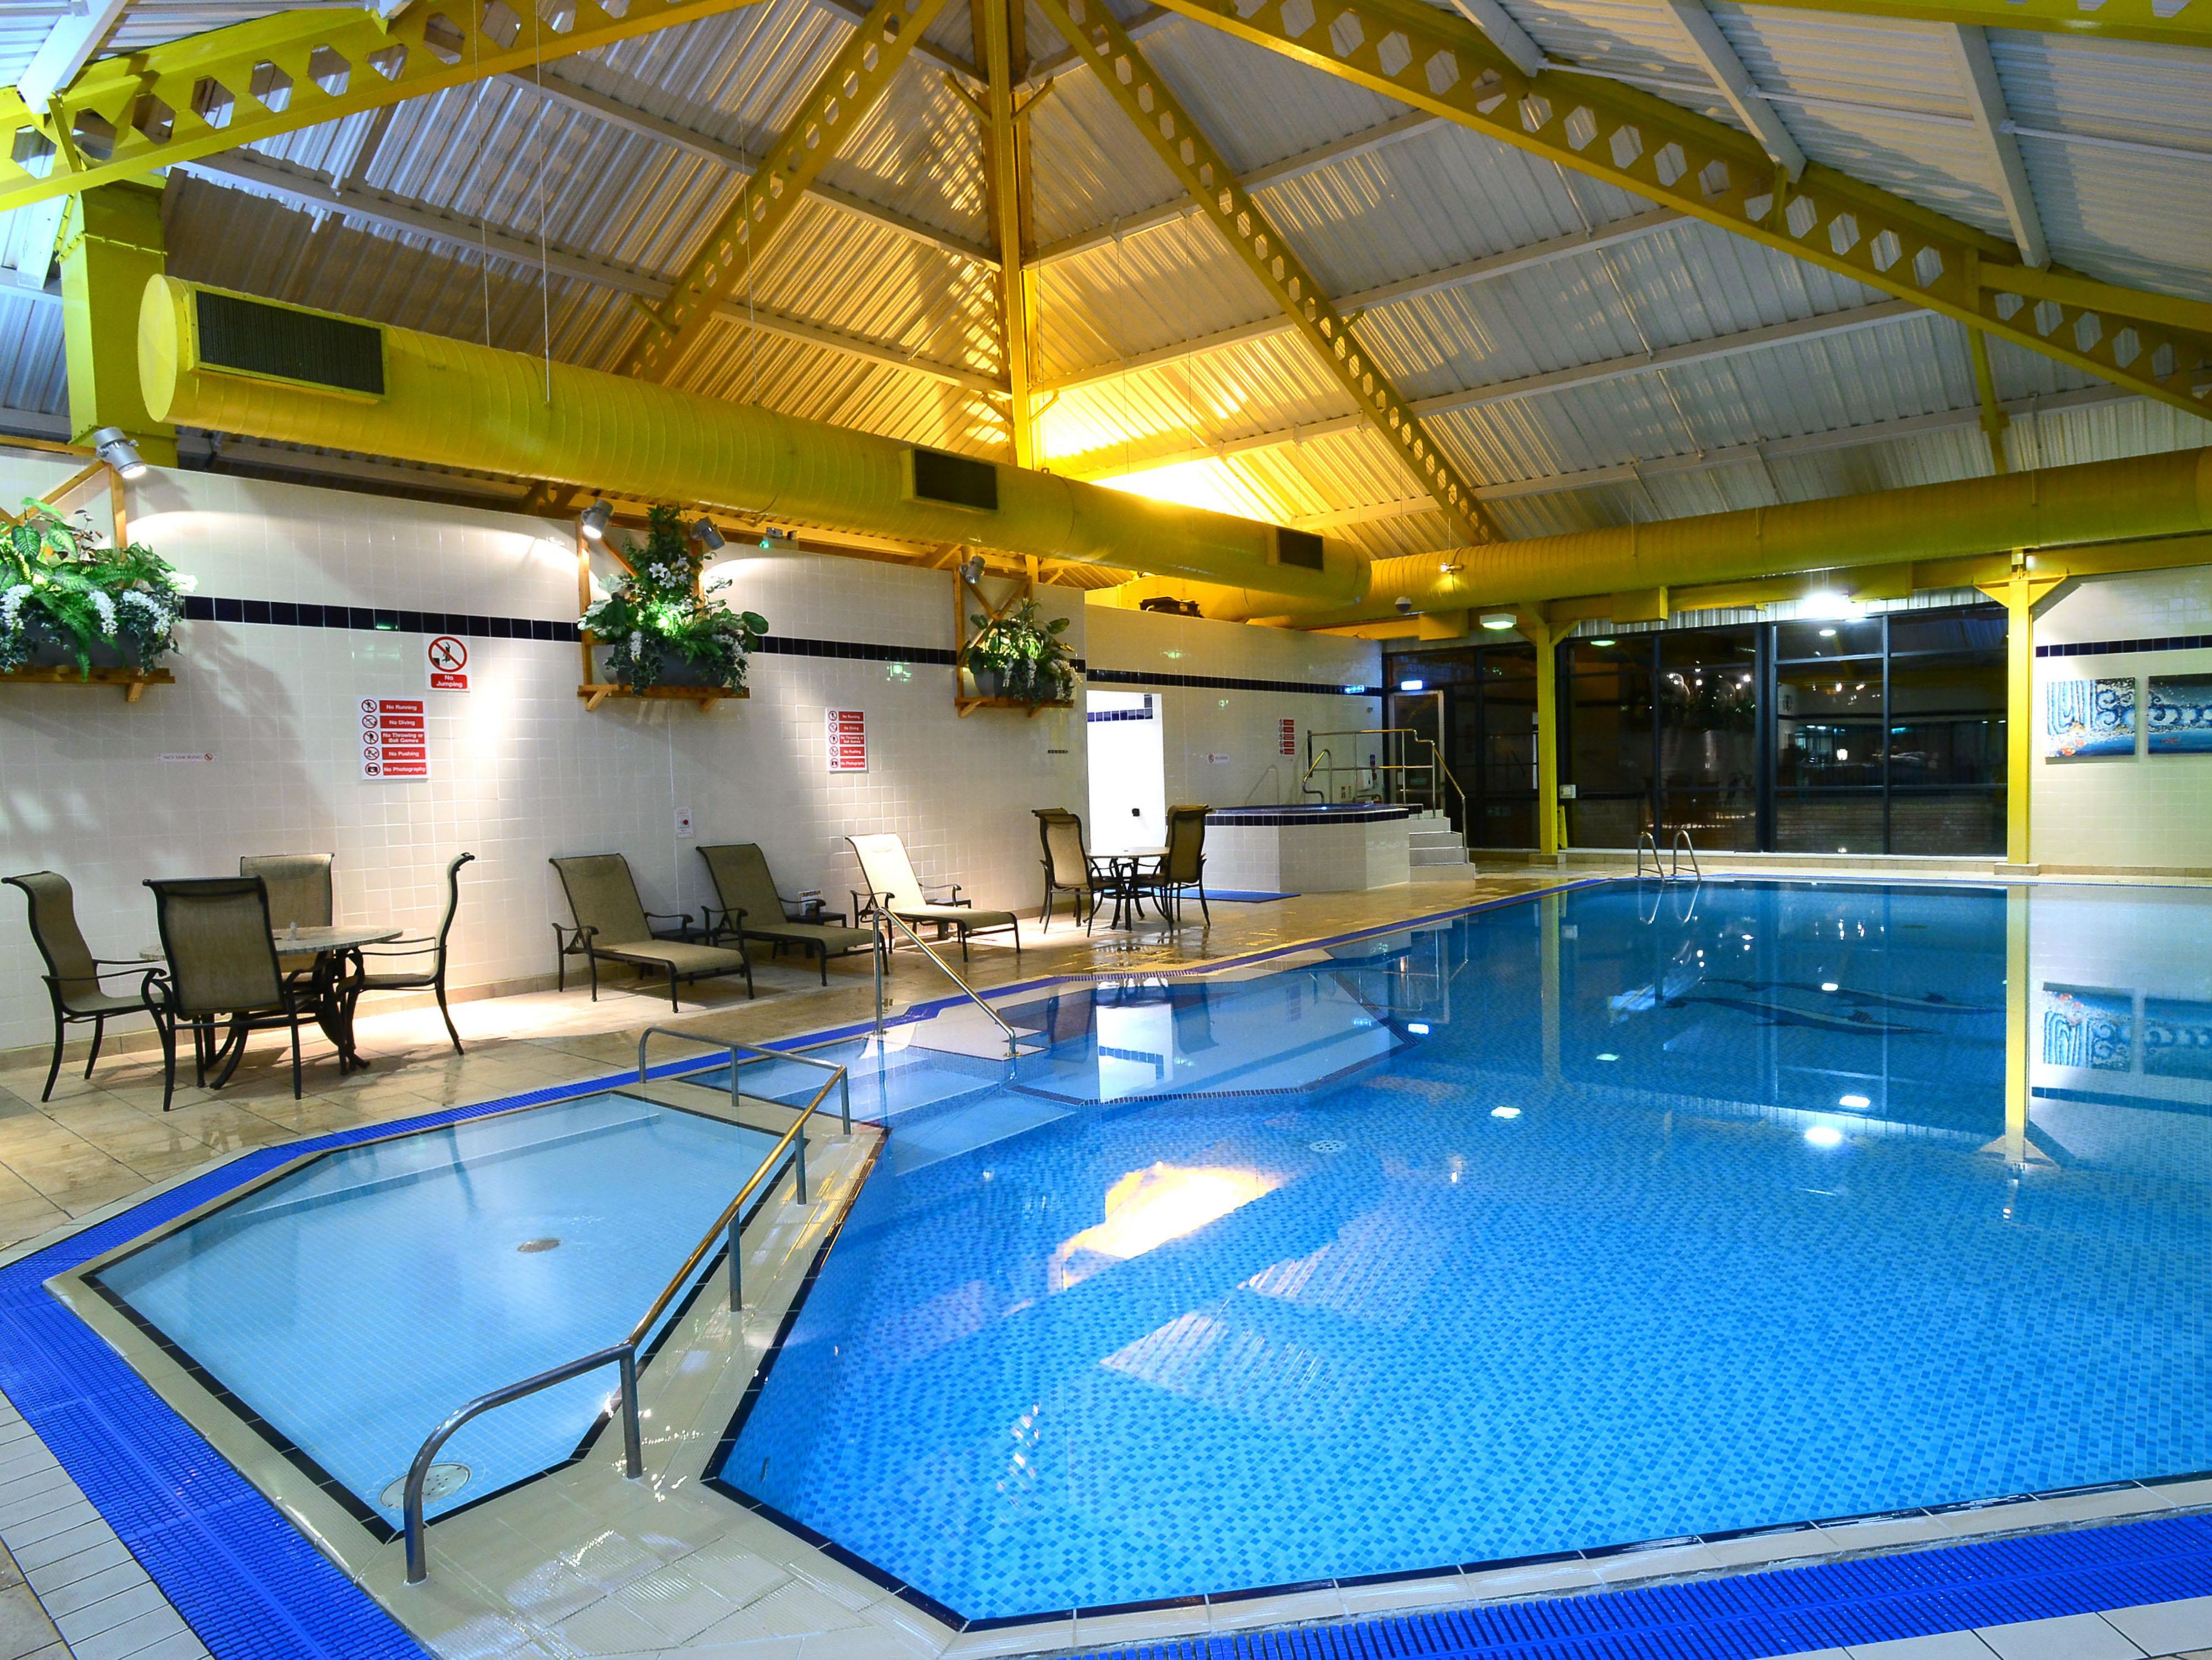 Relax in the Revive Leisure Club, with its warm swimming pool, spa pool, saunas and steam room facilities; or work out in the recently refurbished Gym. 

To book a swim slot, find out opening times and conditions of use, please call us in advance.